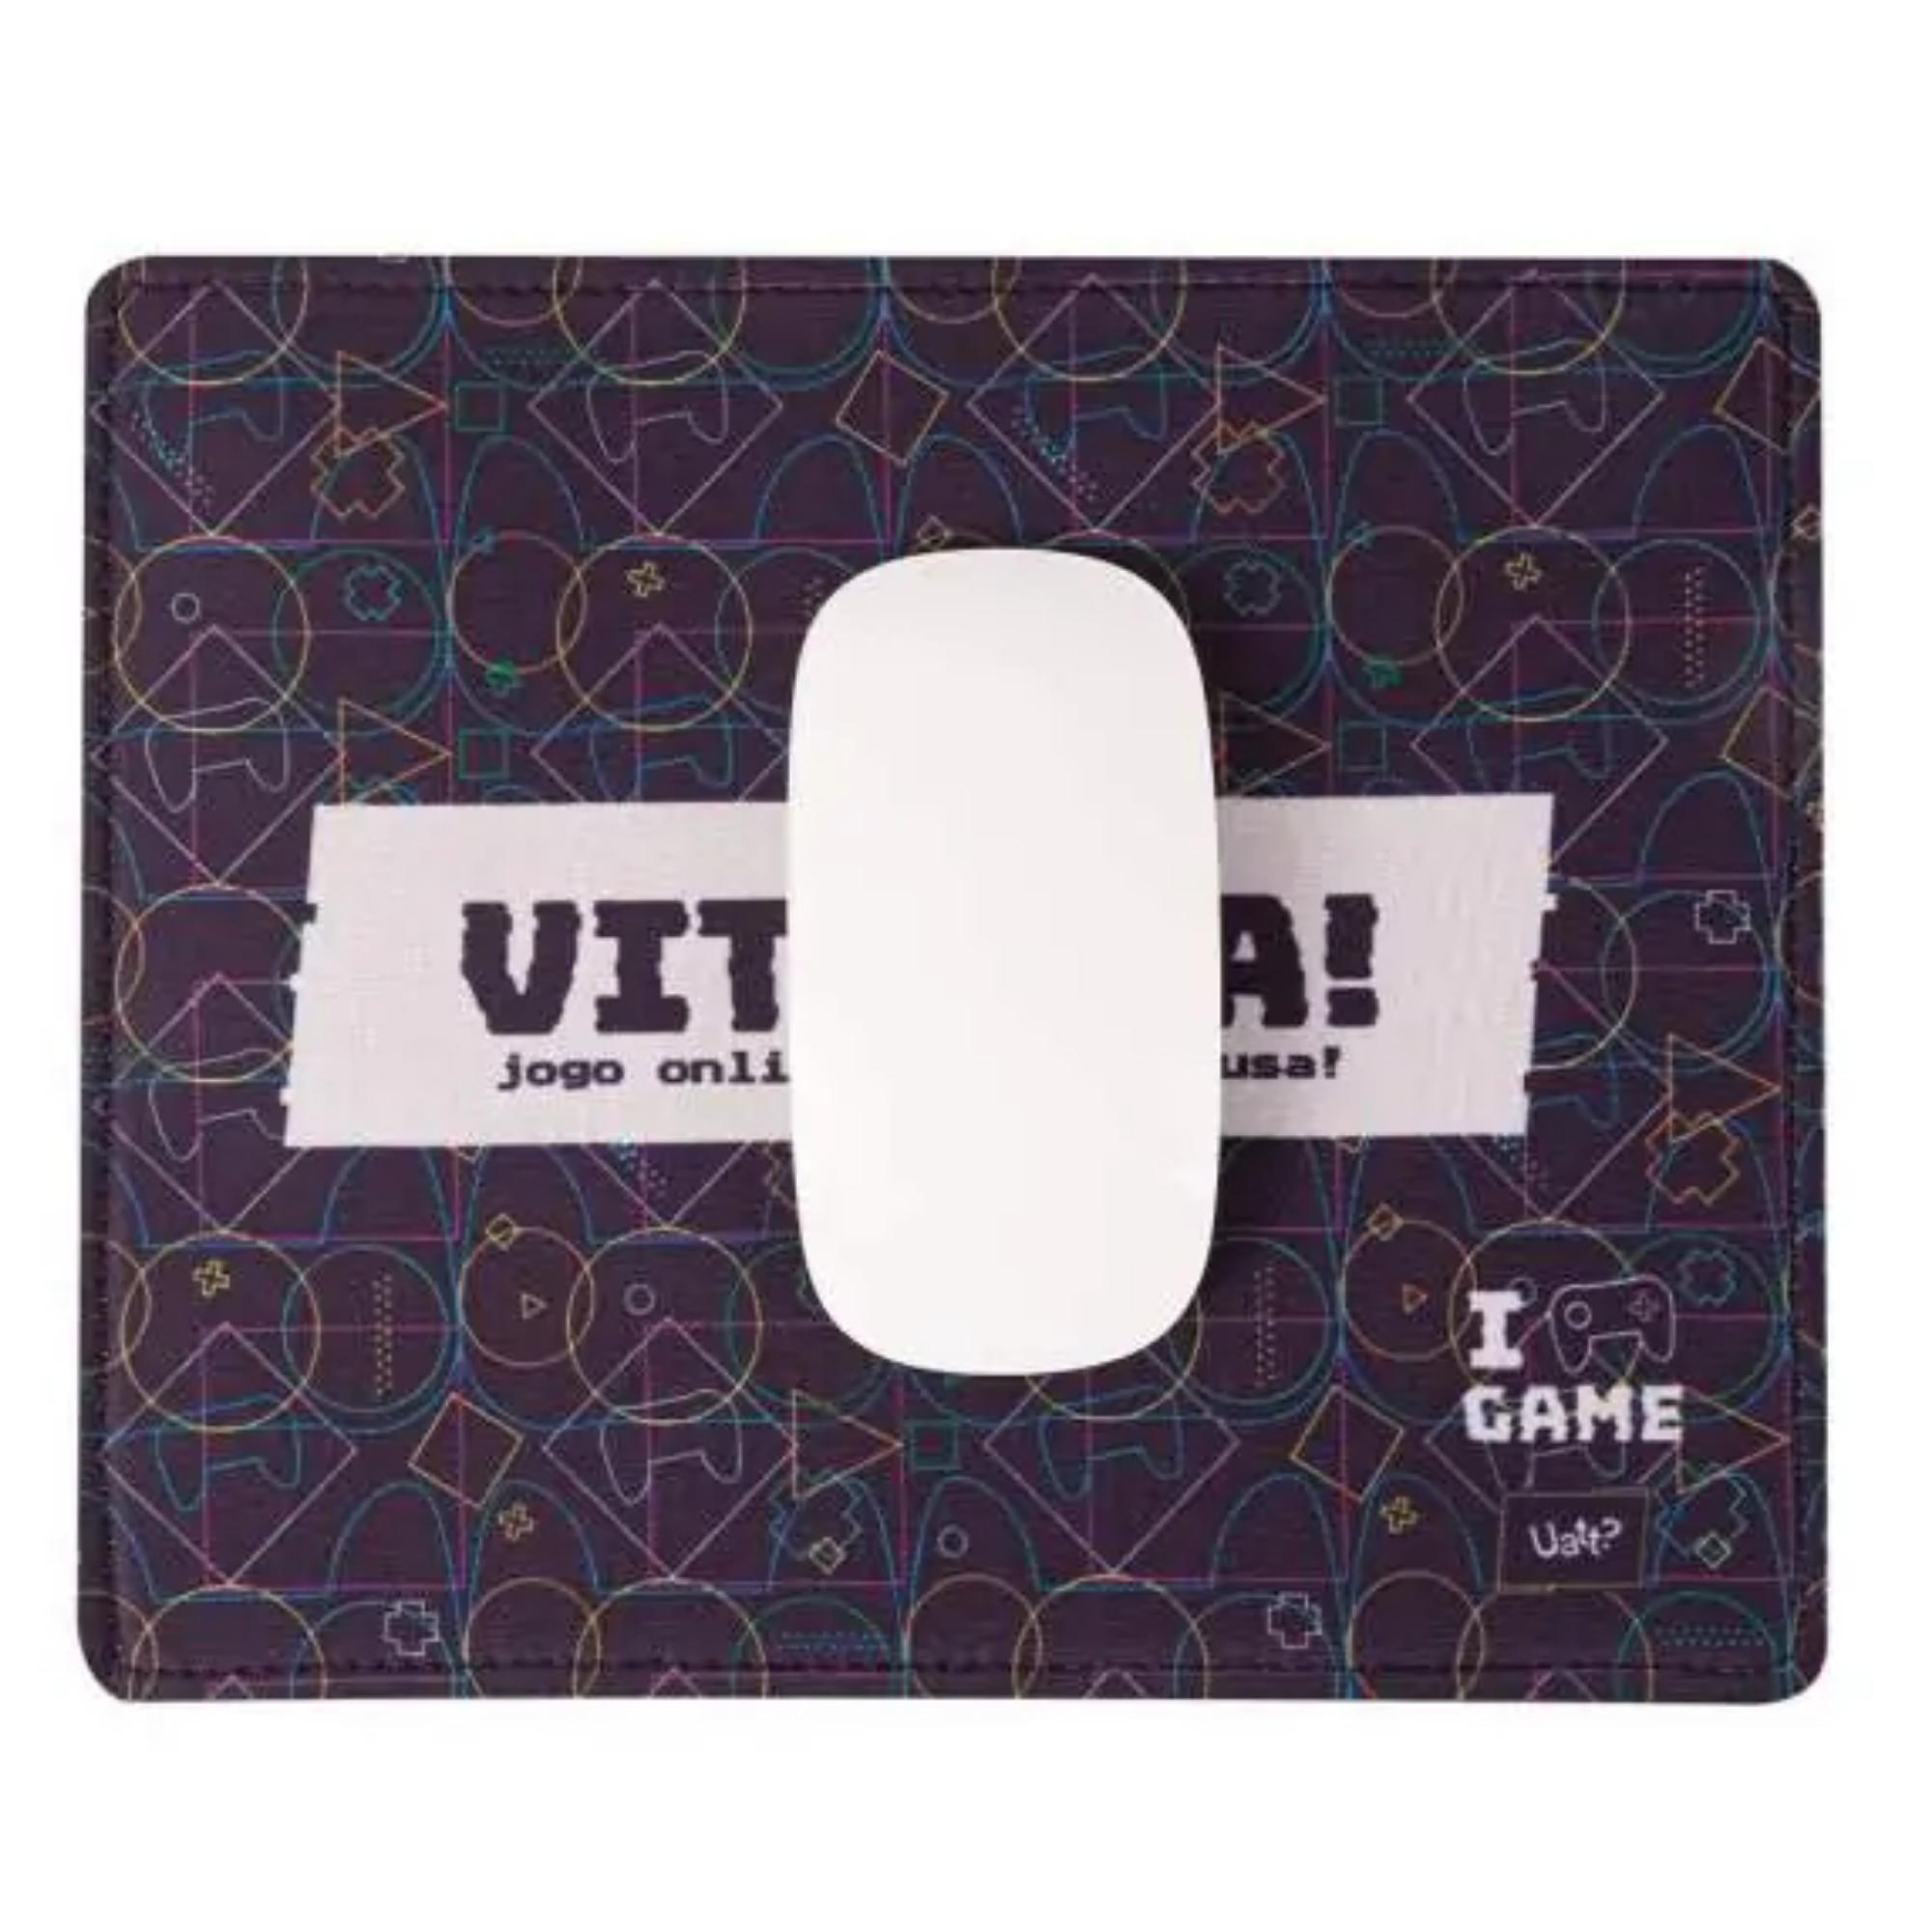 MOUSE PAD SOFT - GAME GEEK